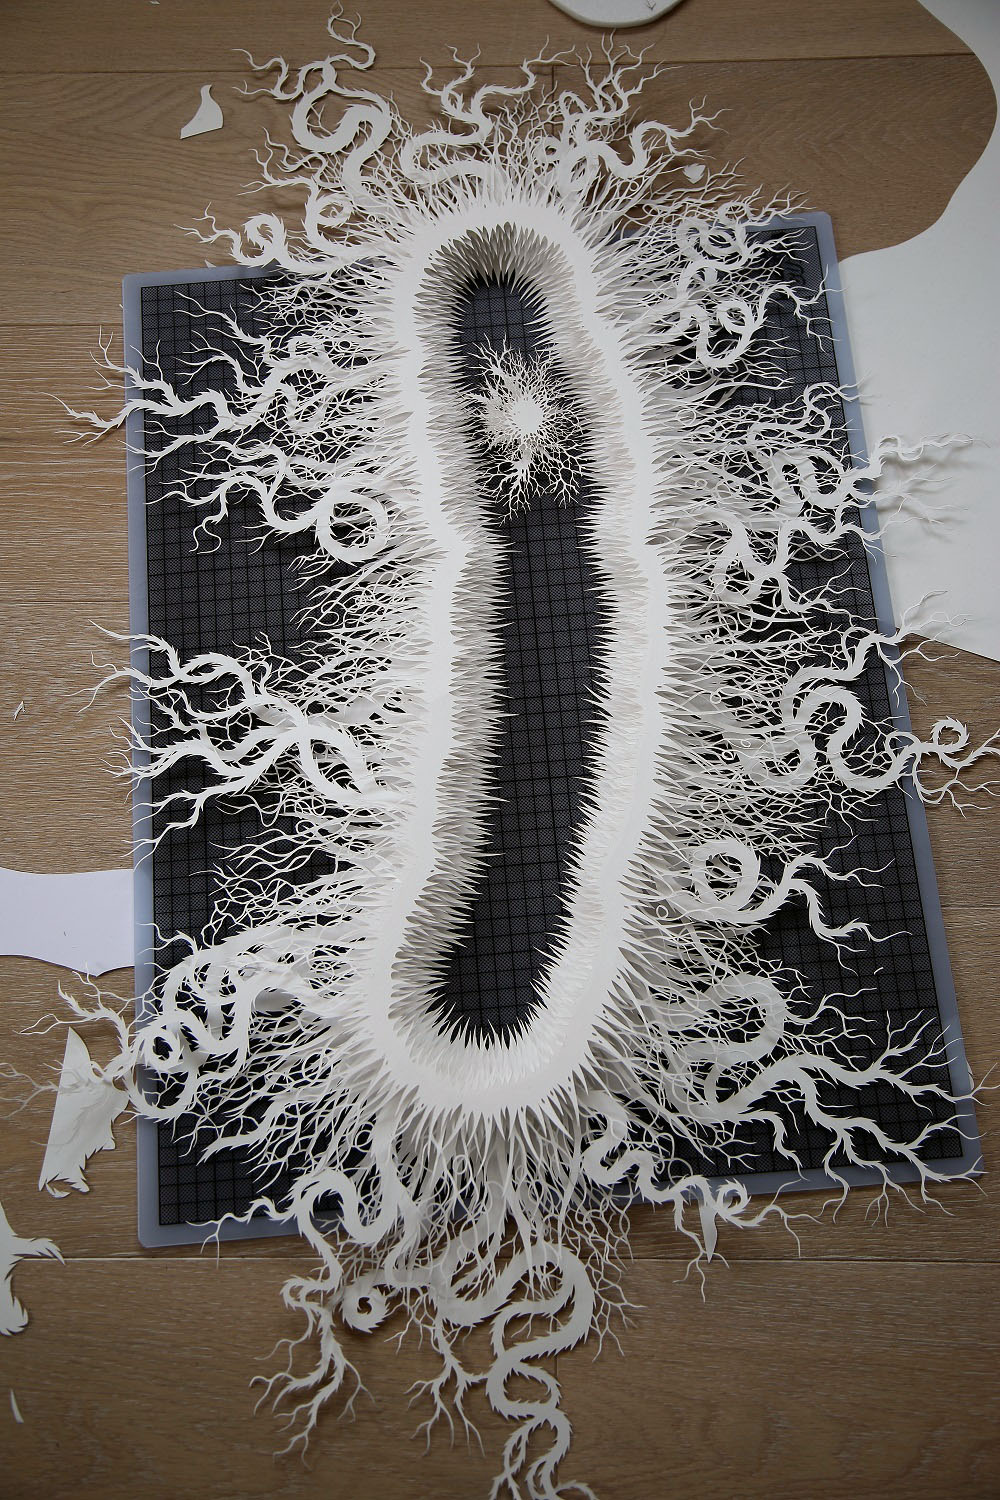 This Haunting Bacteria Is Actually An Intricate Hand-Cut Paper Sculpture